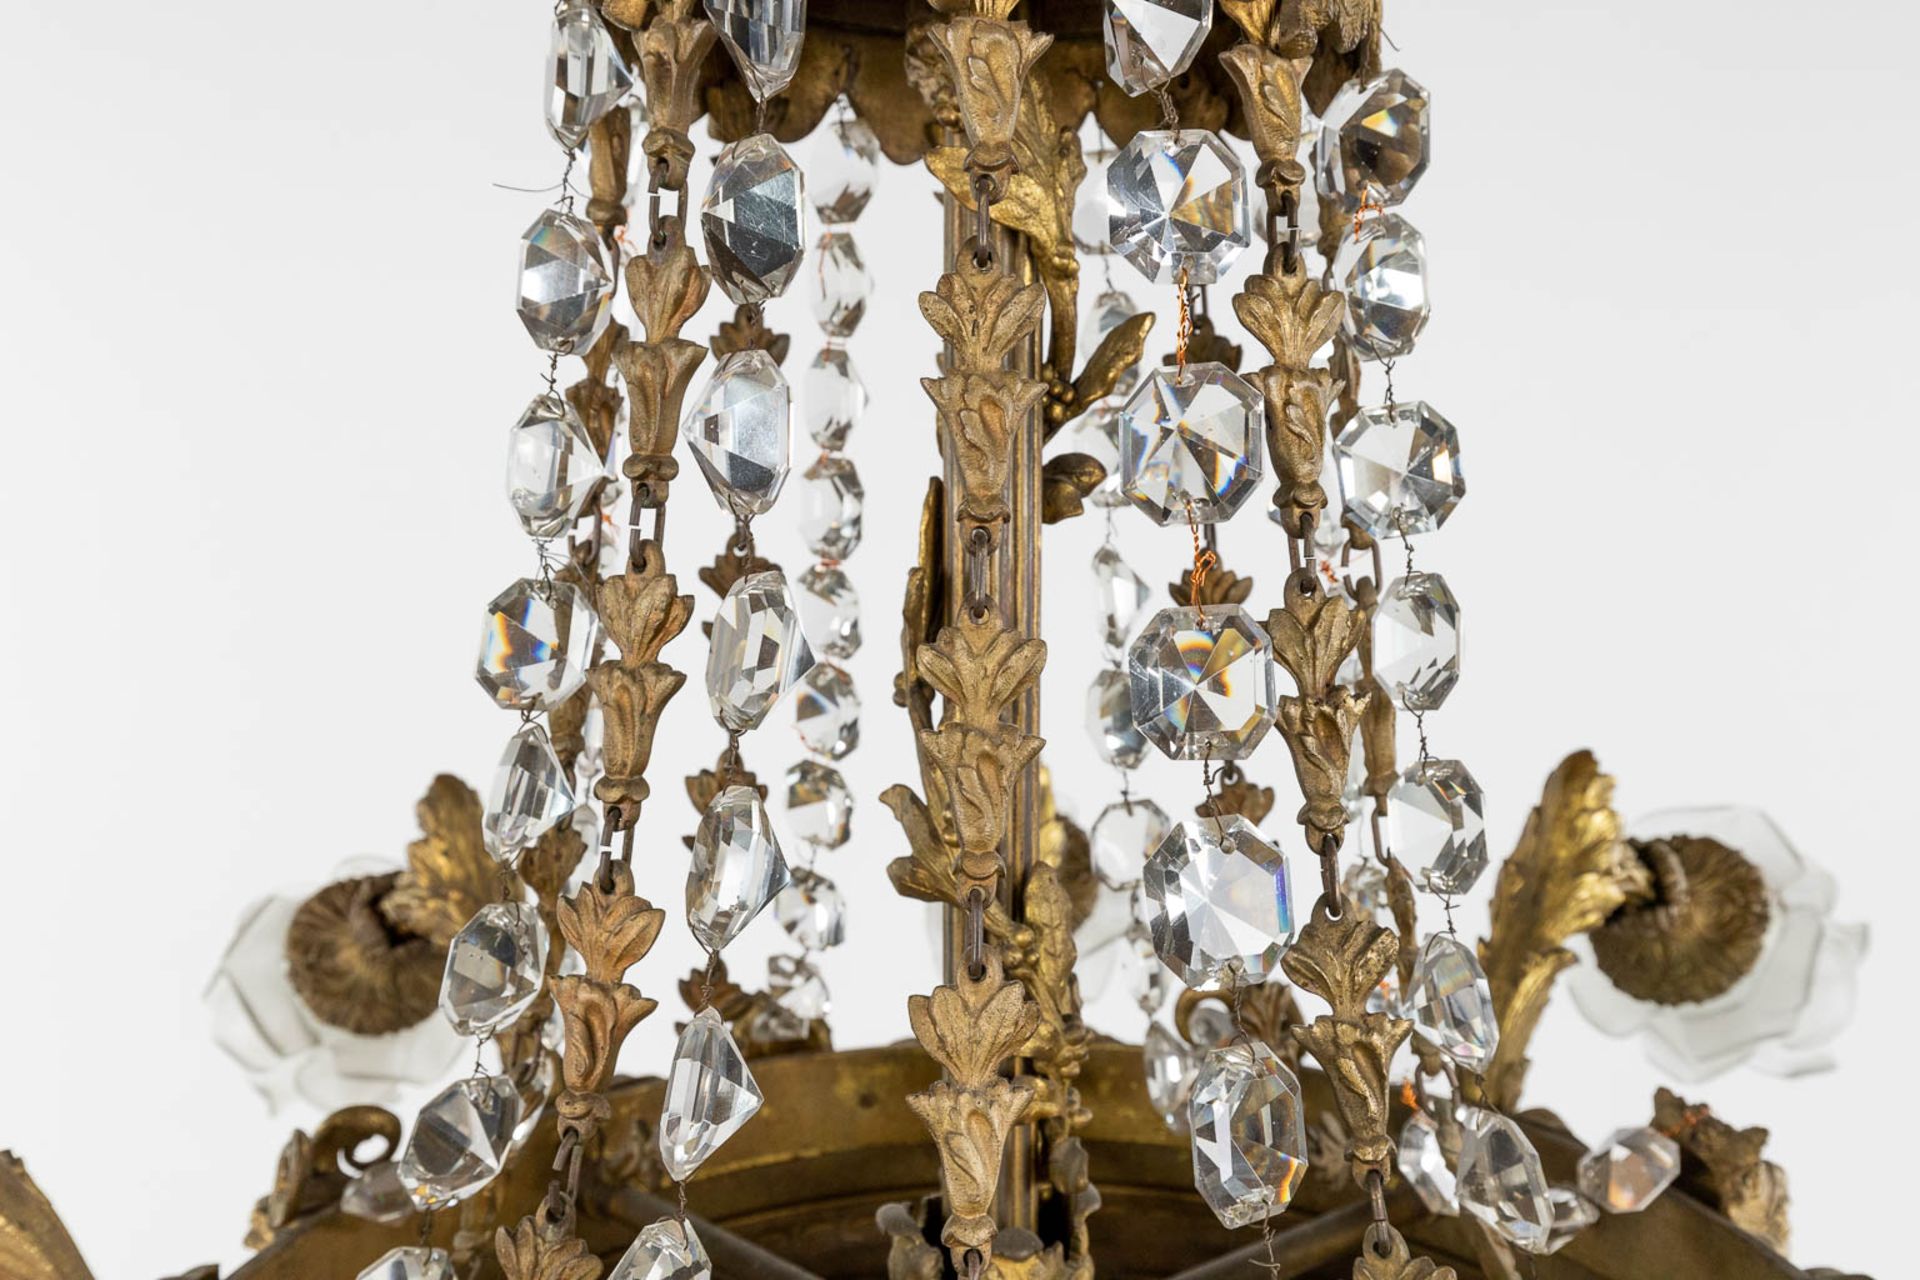 A large chandelier 'Sac ˆ Perles', bronze and glass. Circa 1900. (H: 100 x D: 100 cm) - Image 6 of 15